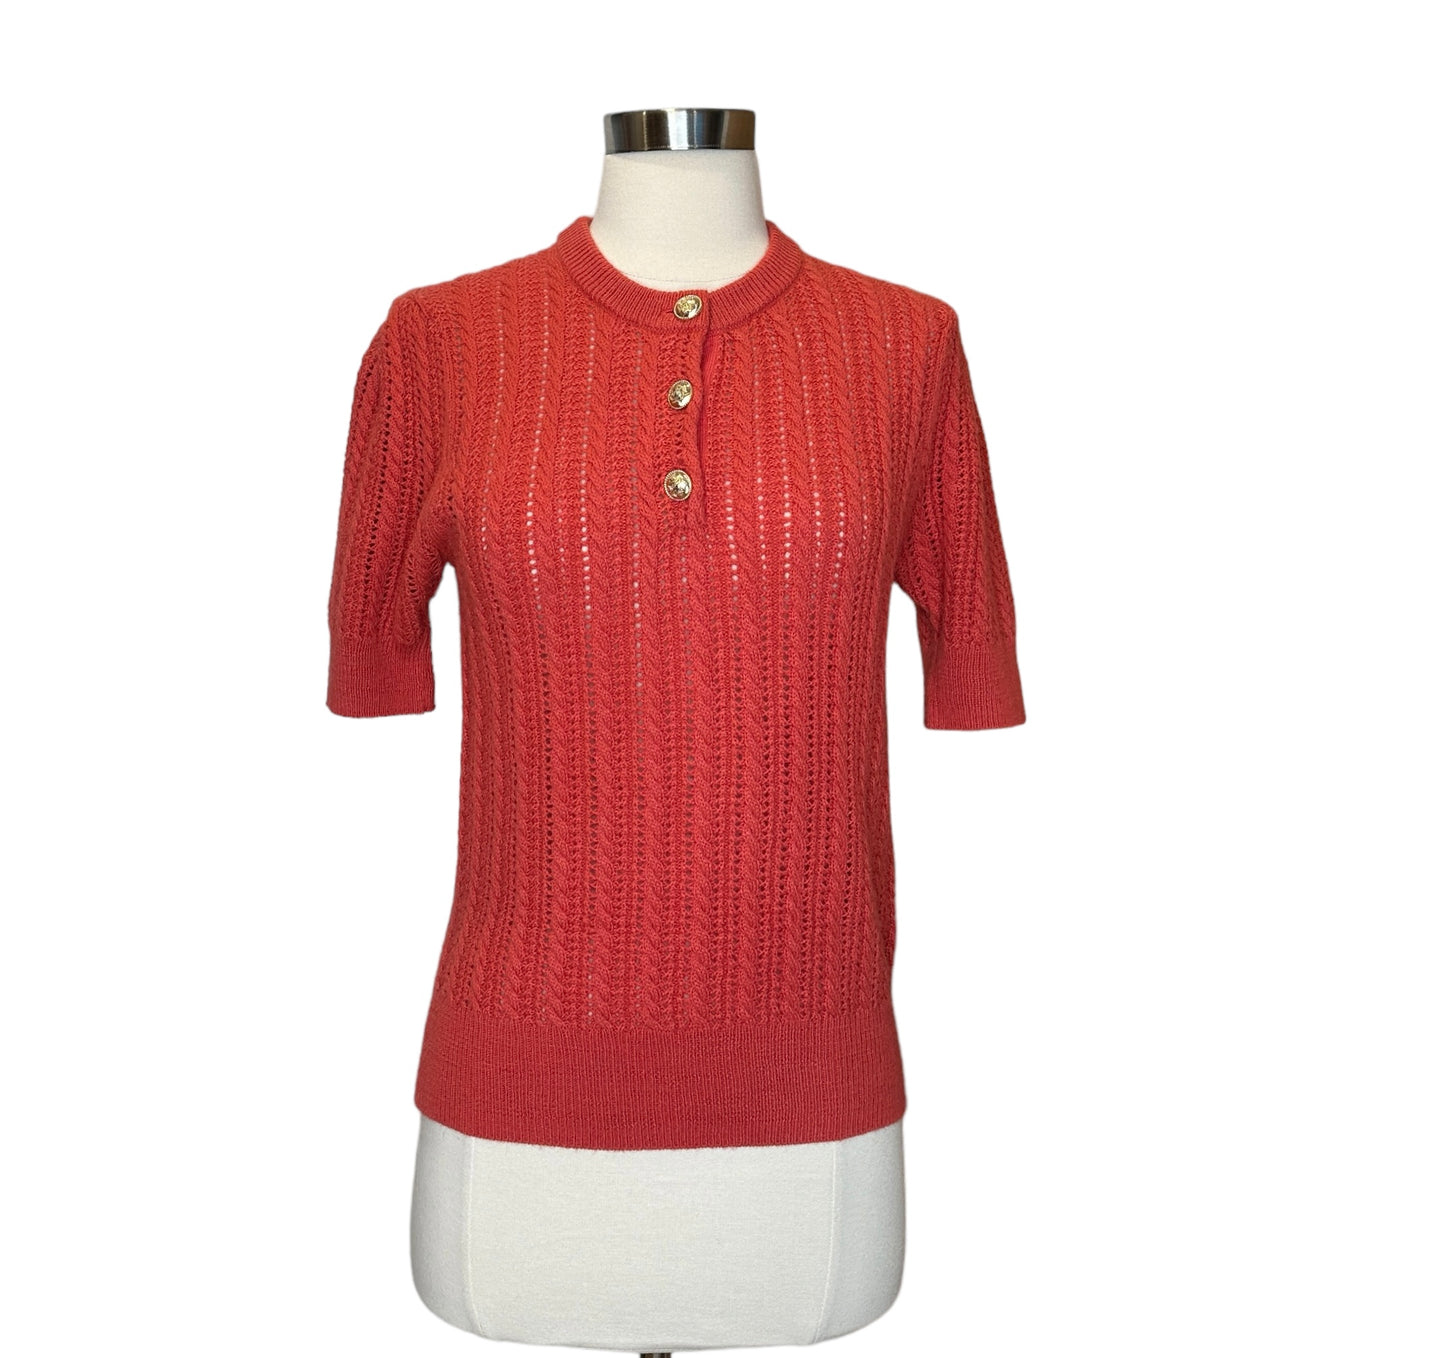 Red Knit Top - XS